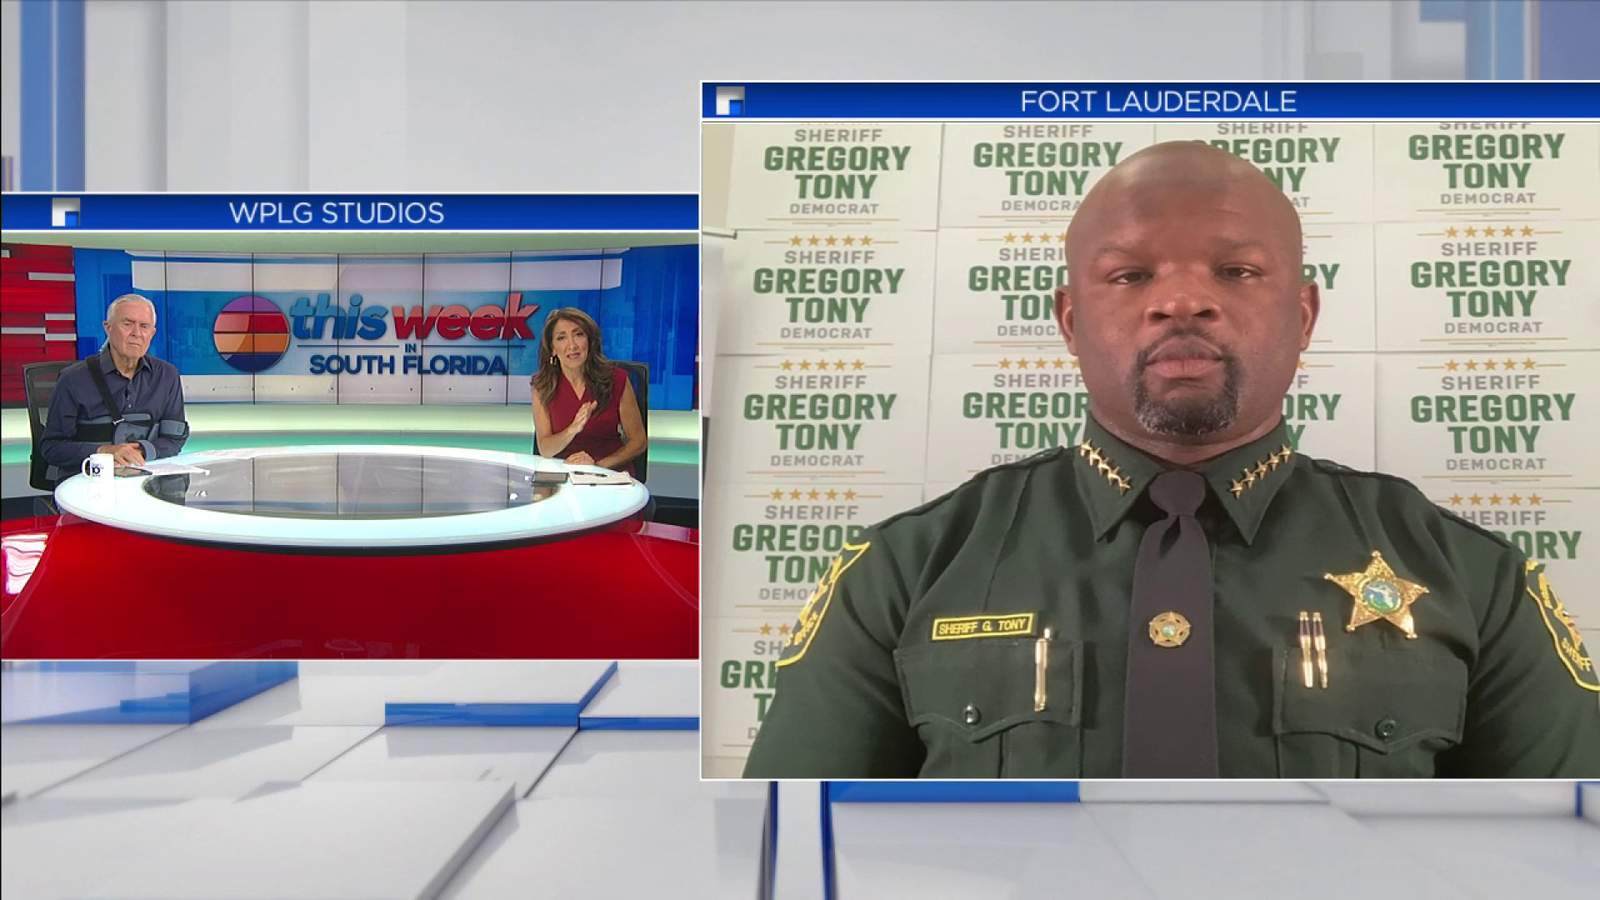 This Week in South Florida: Broward County Sheriff Gregory Tony